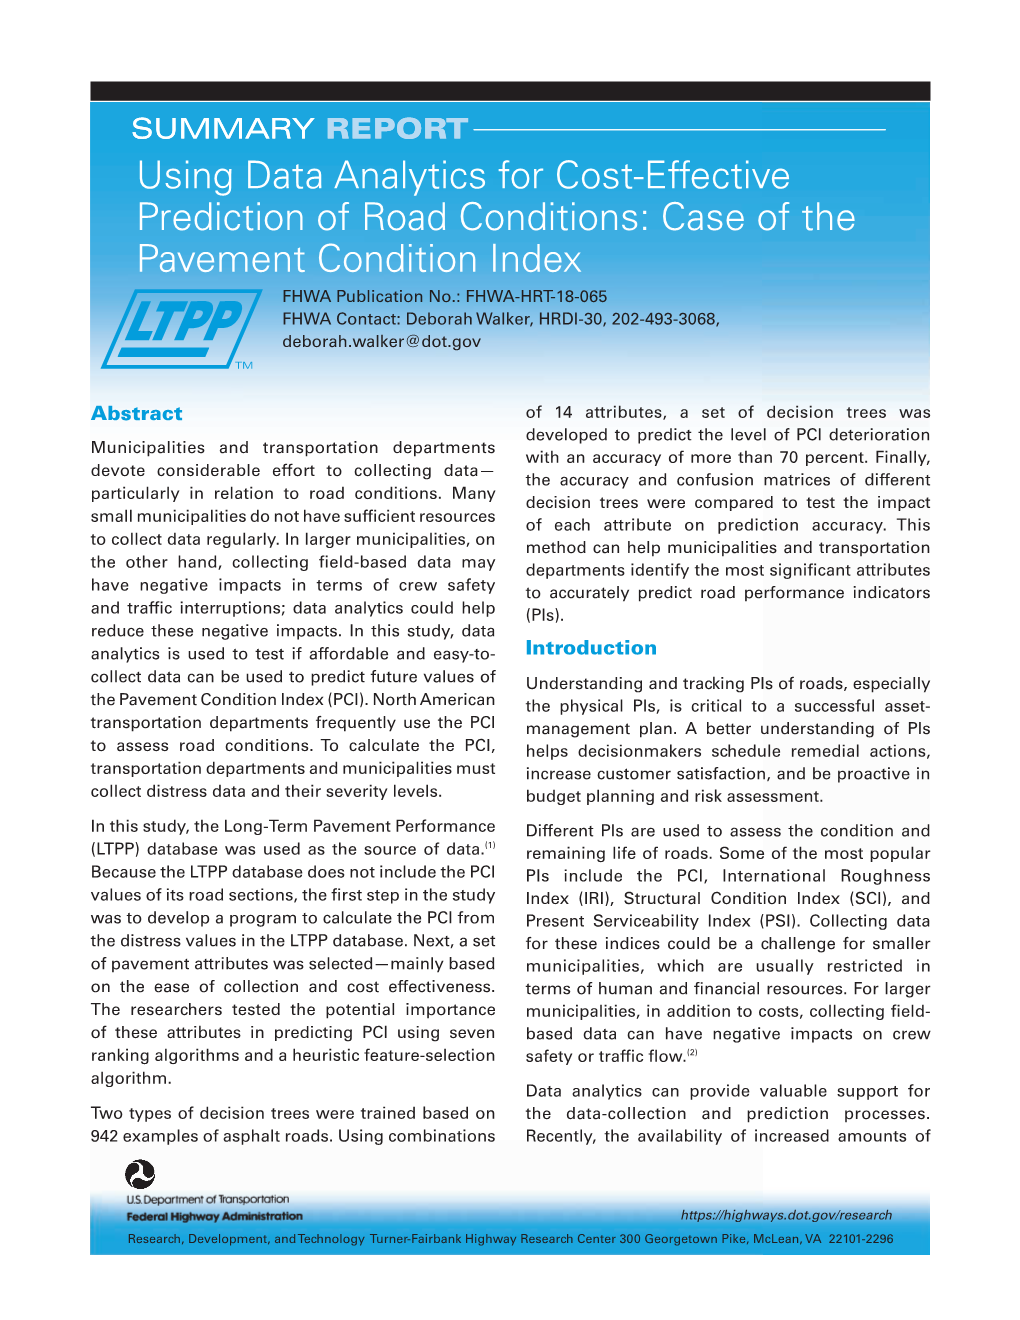 Using Data Analytics for Cost-Effective Prediction